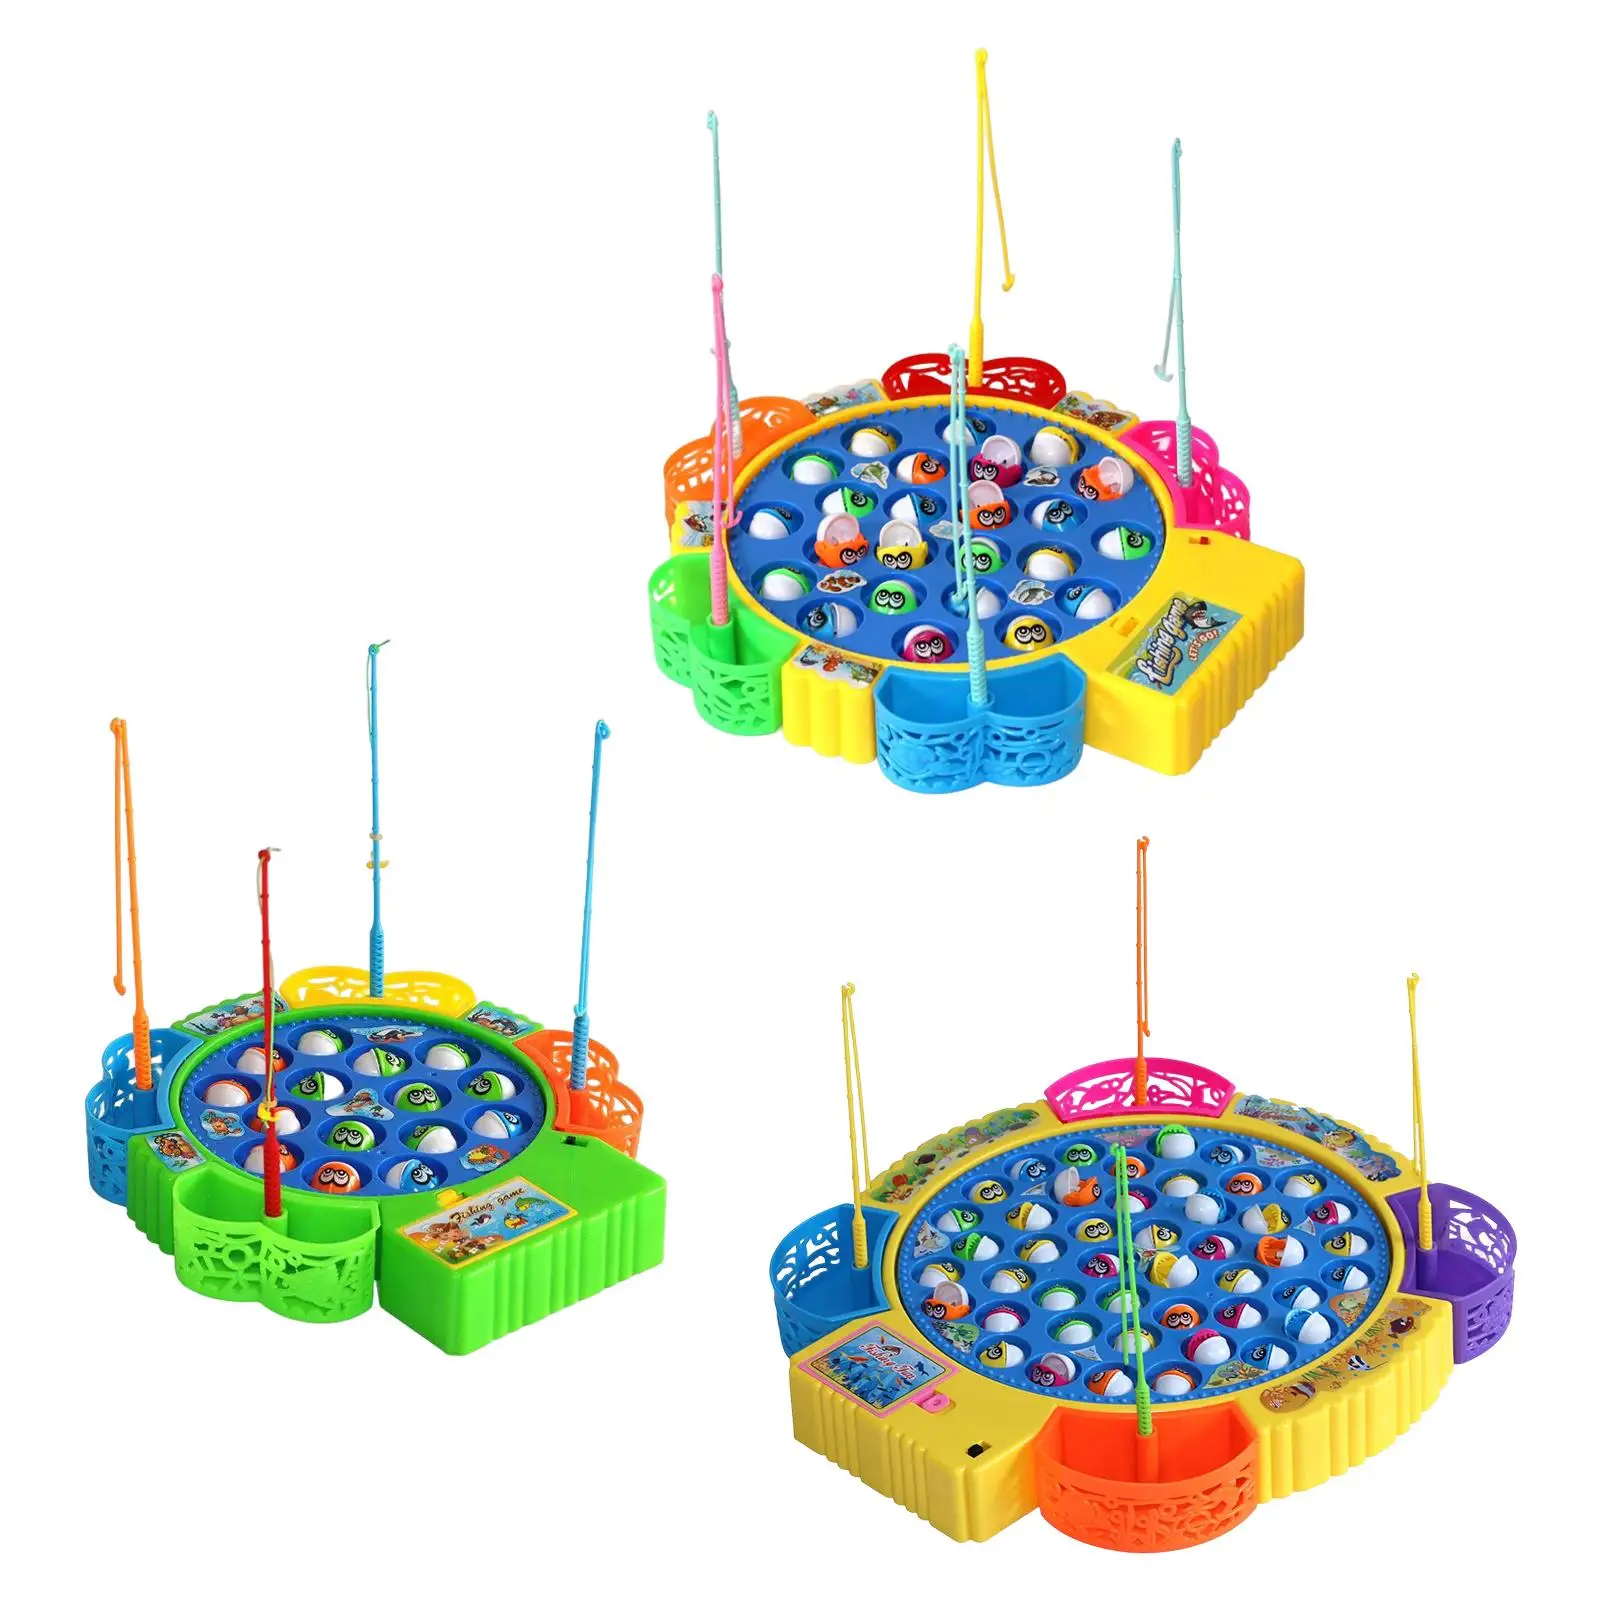 Novelty Rotating Fishing Game Kids toy, kids Fishing Toy Fine Motor skill 3-5 Years Old Educational Toy